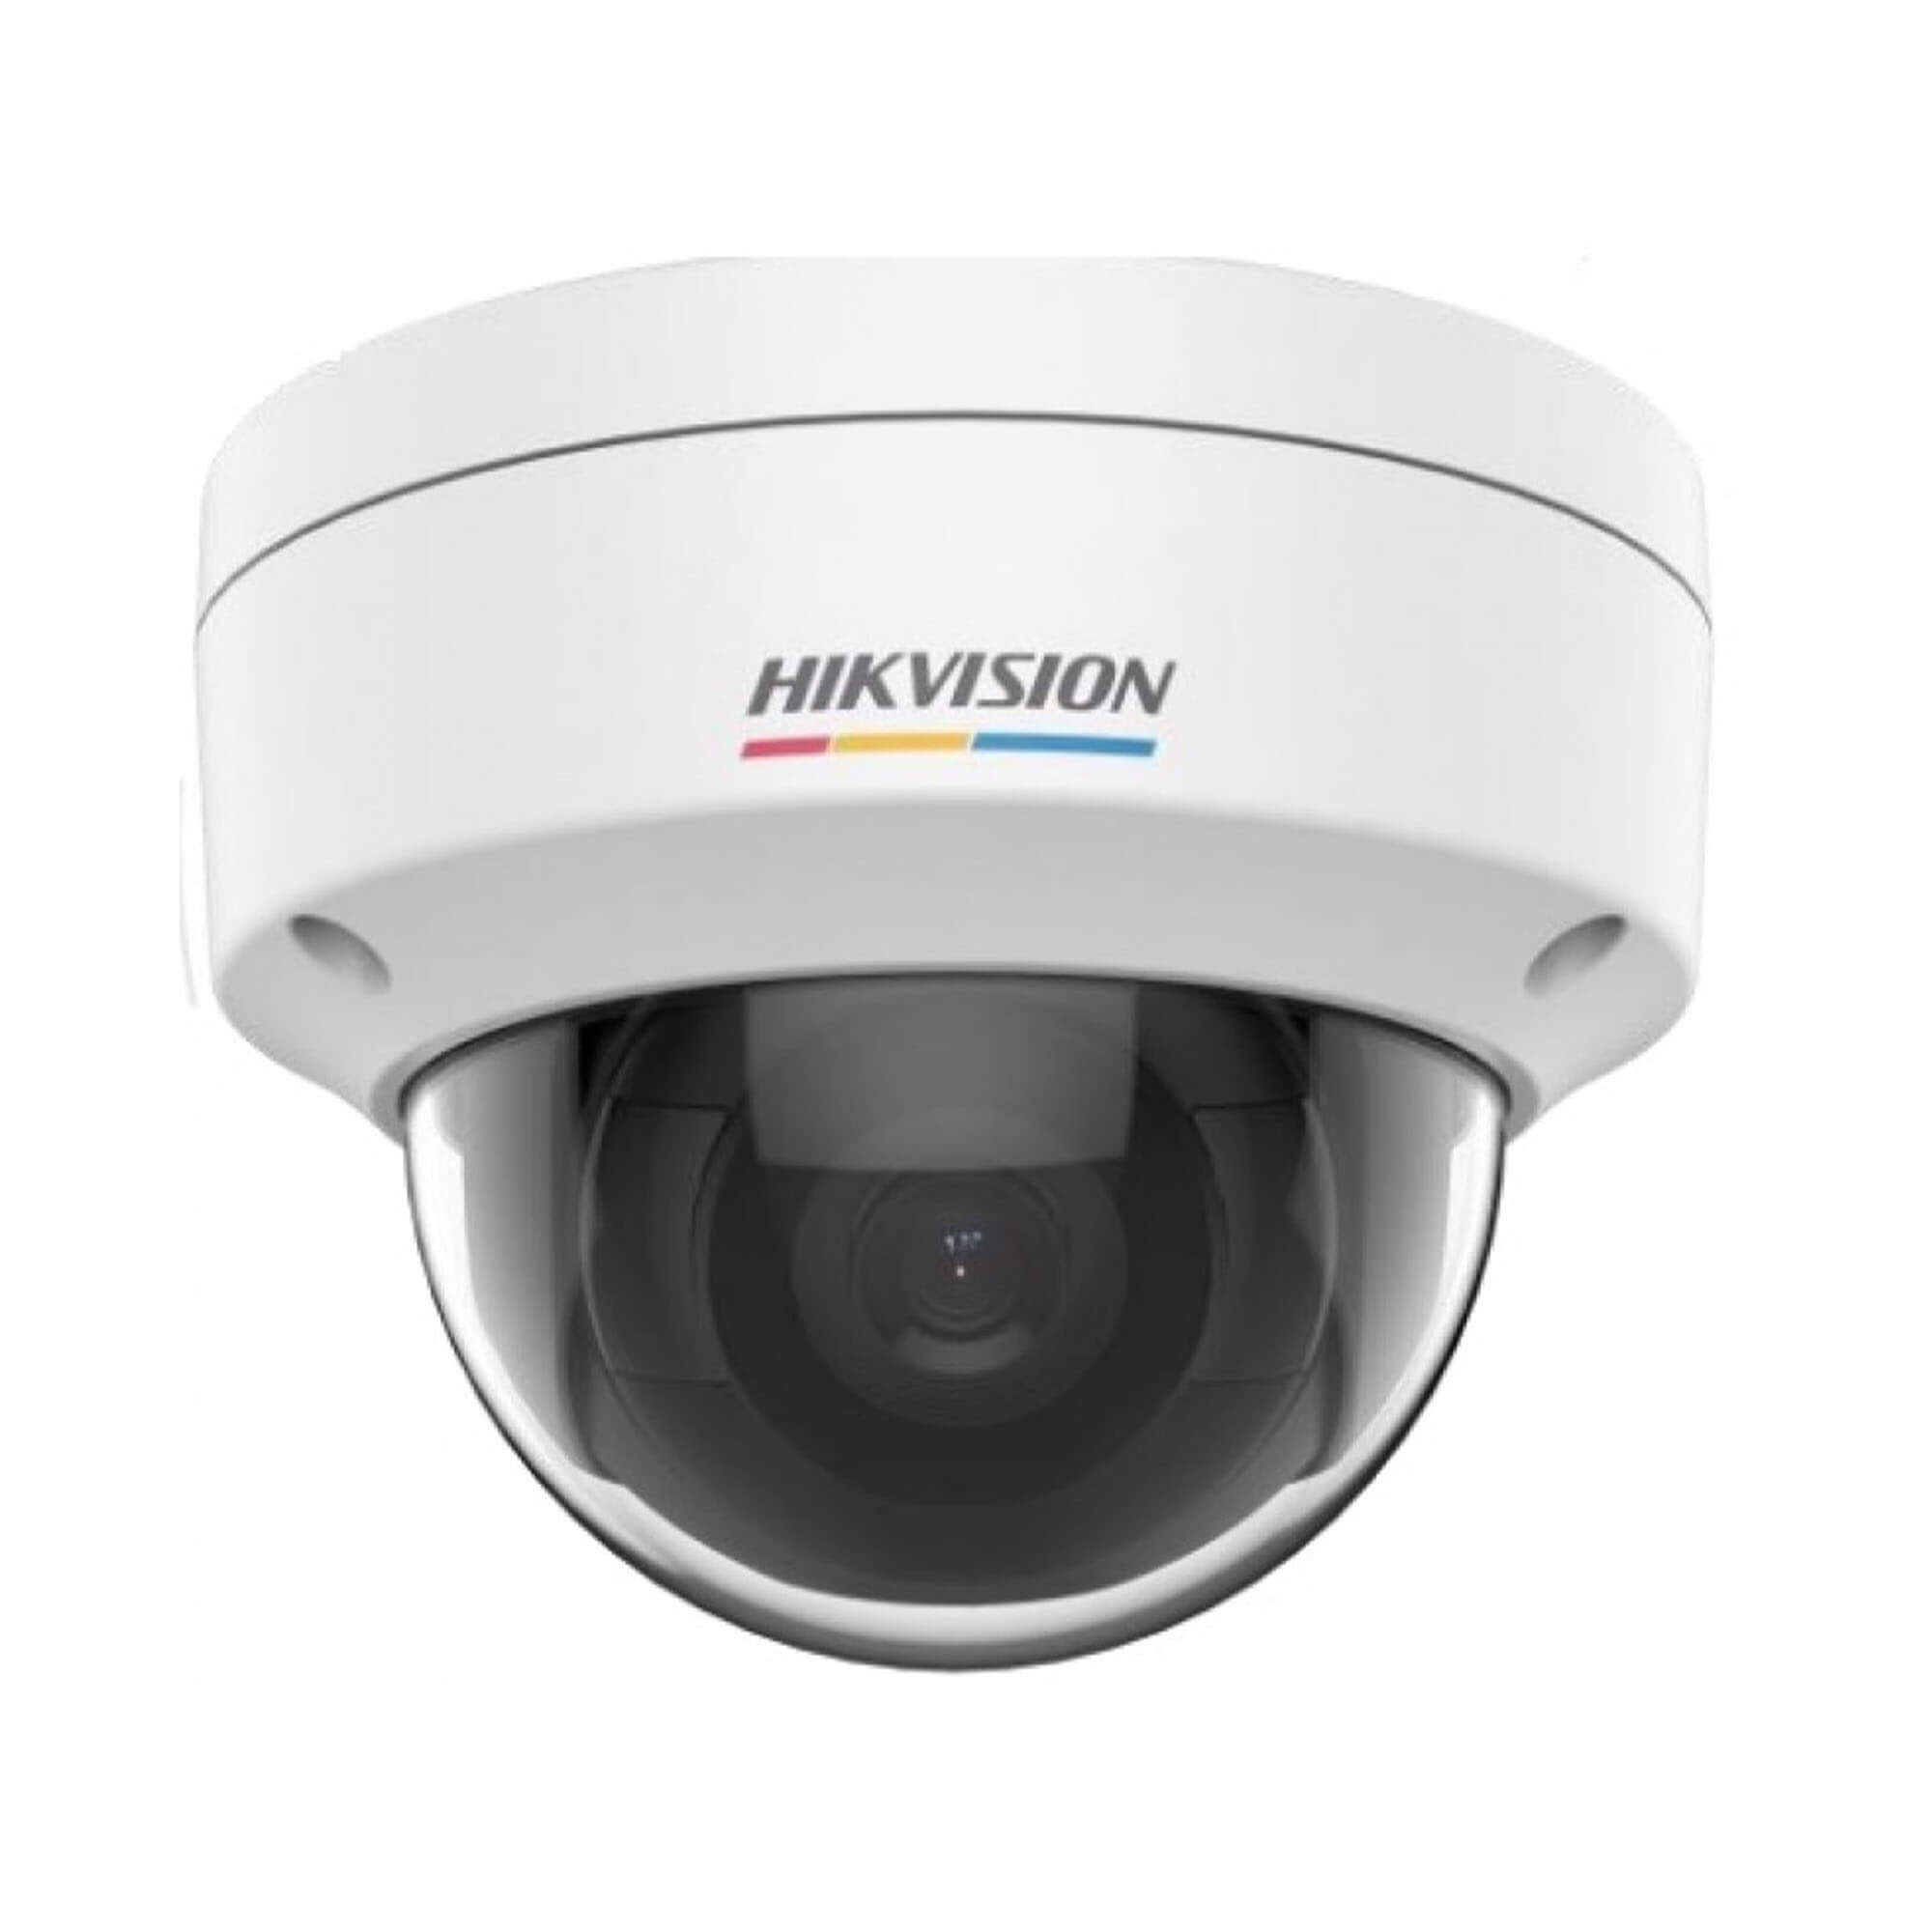 Hikvision Mp Colorvu Lite Fixed Dome Camera Ds Cd G Cctvpinoy Co